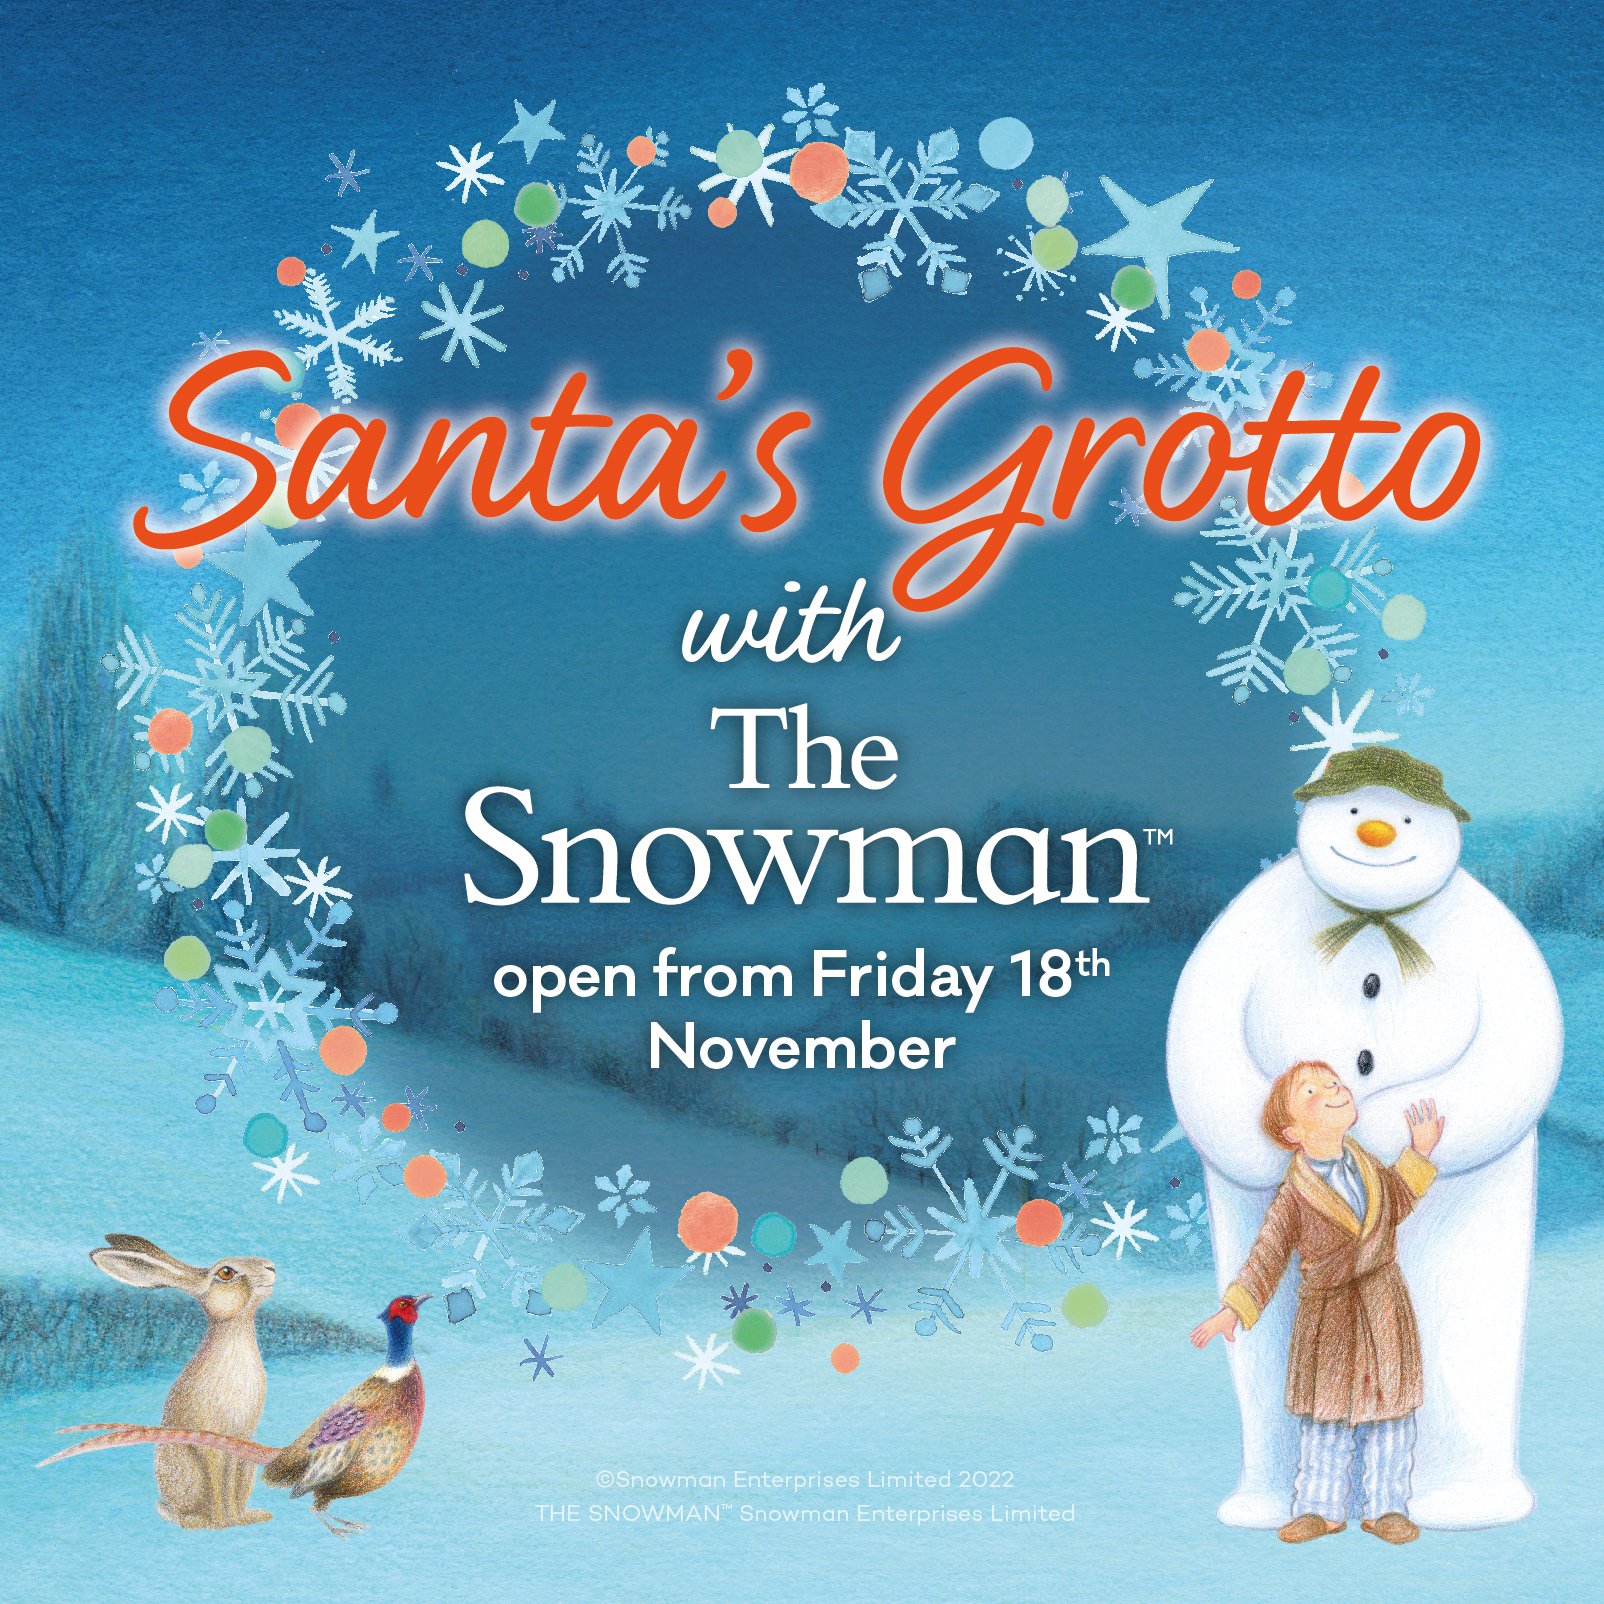 centre:mk welcomes The Snowman to their Santa’s Grotto